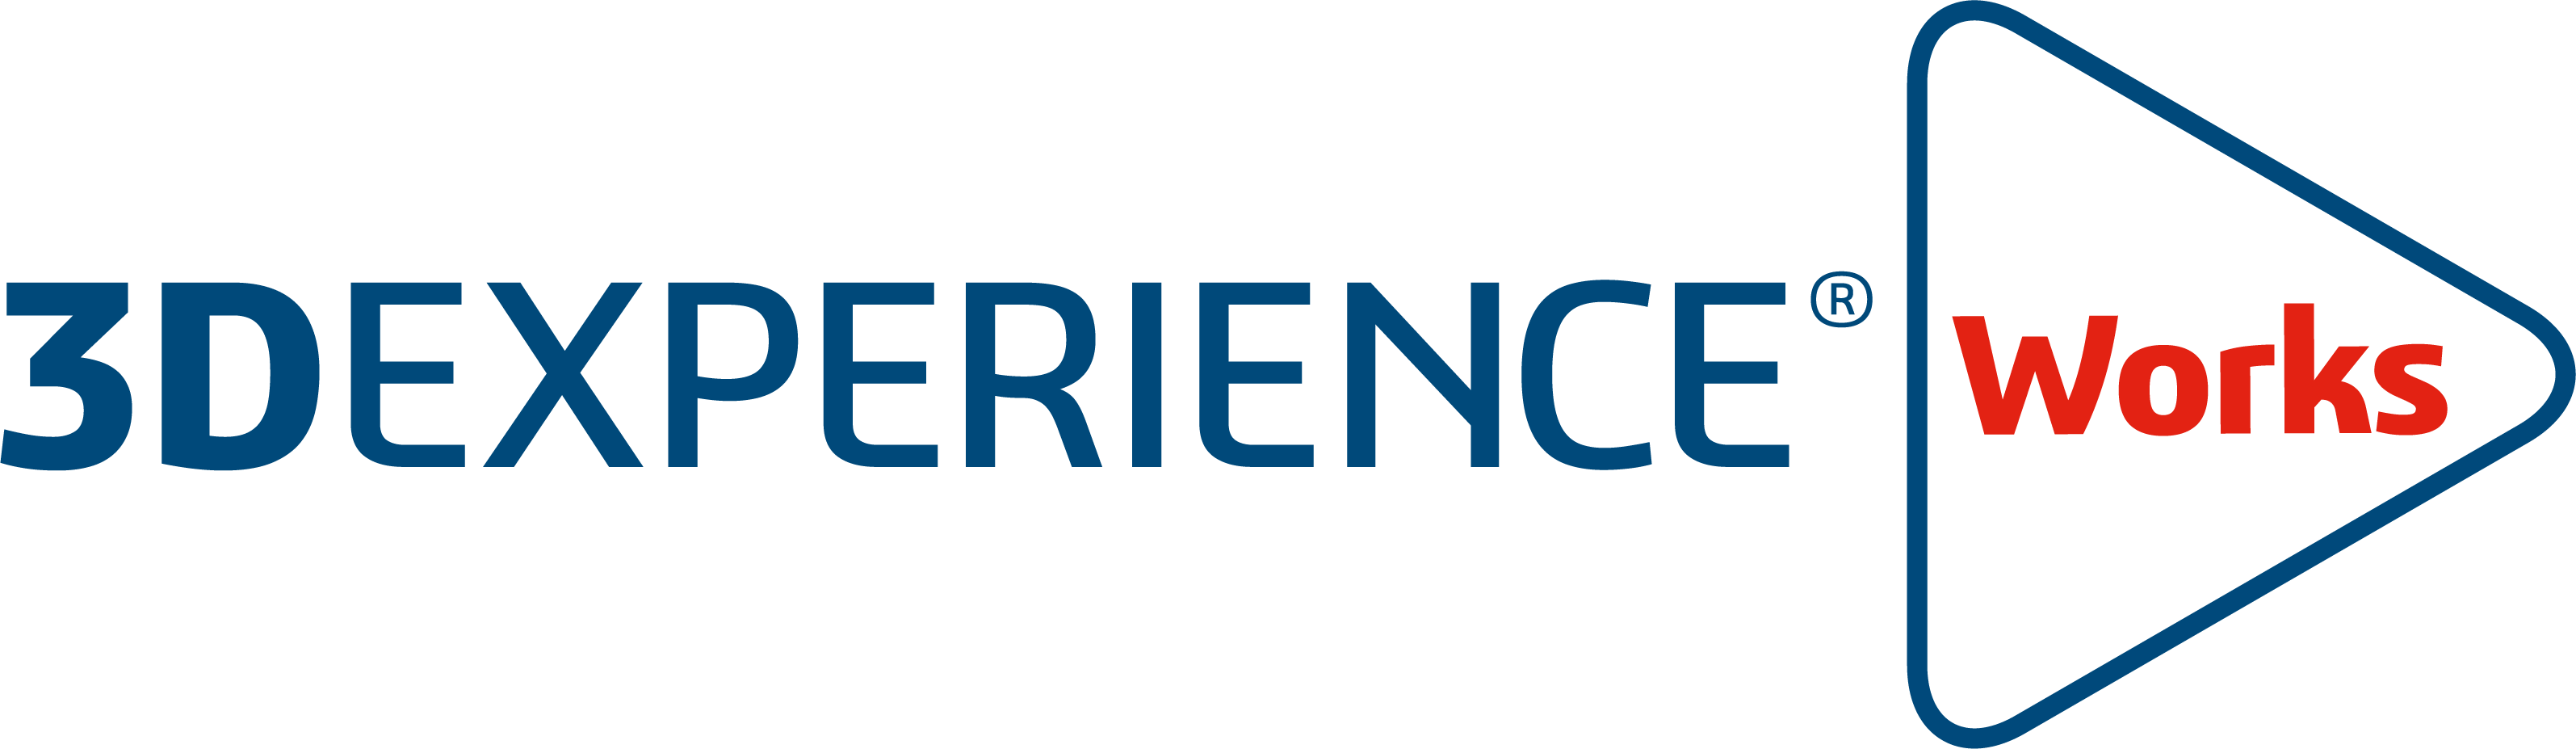 Get a Quote for 3DEXPERIENCE